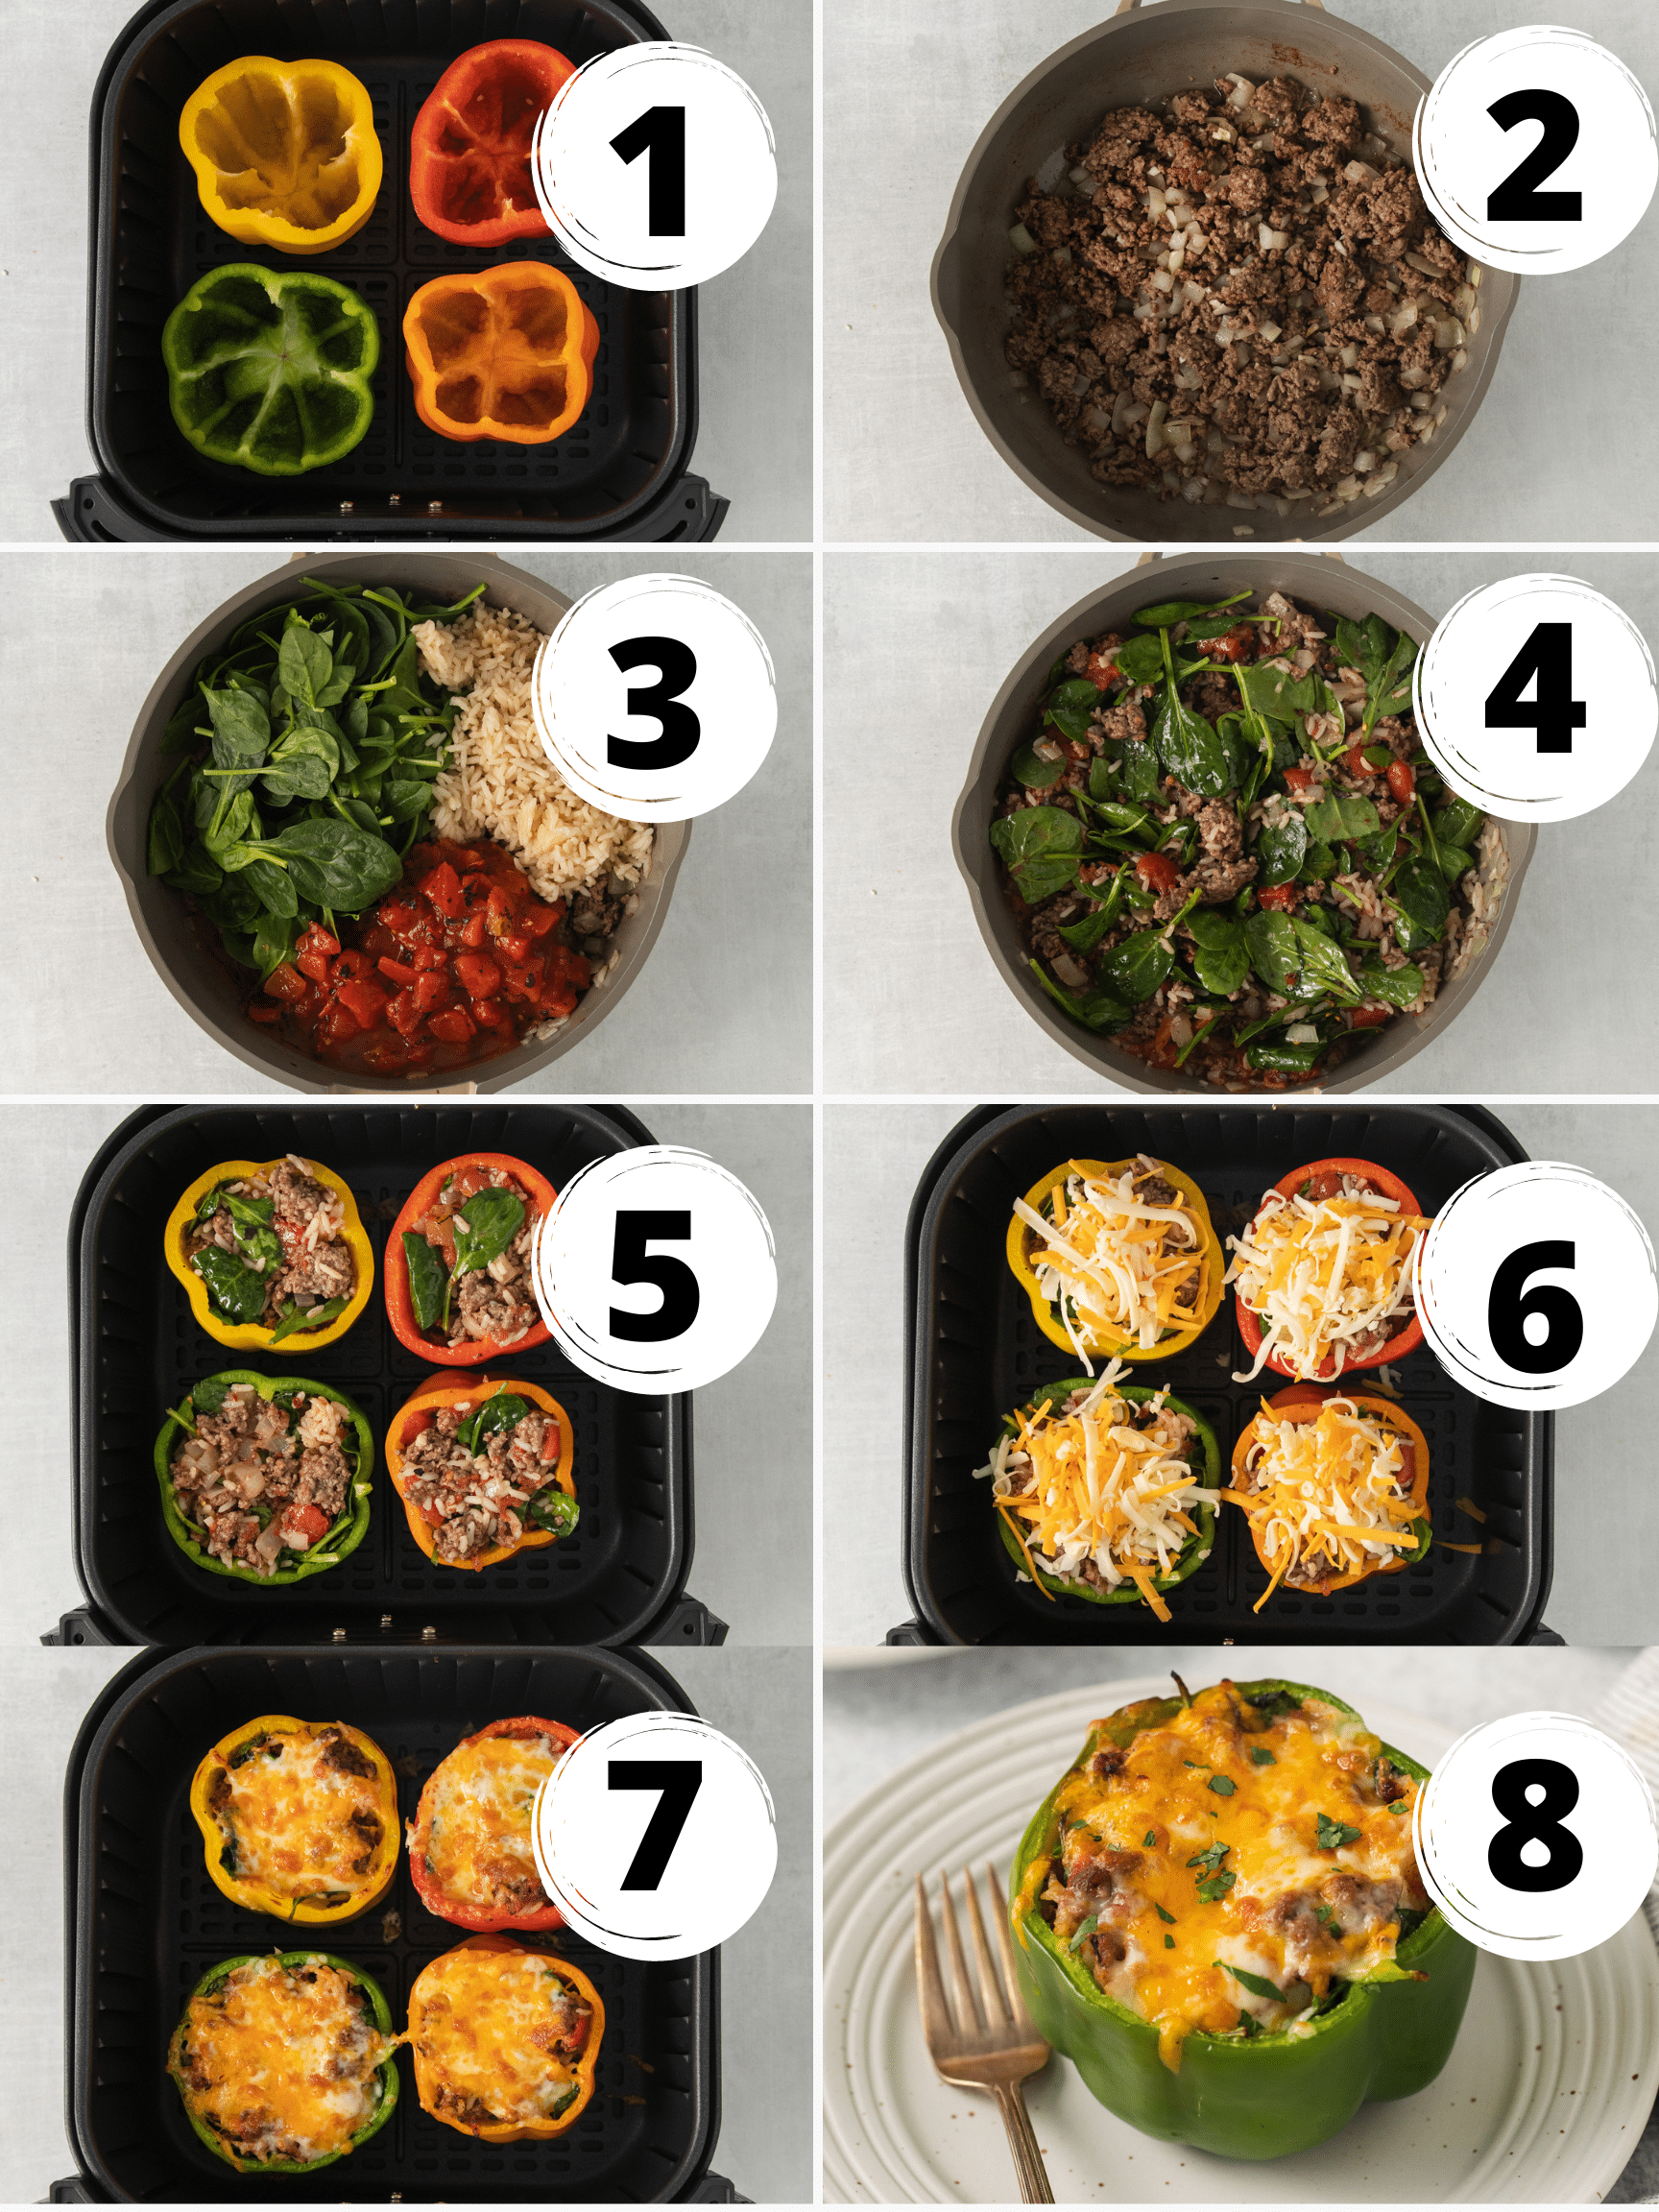 a collage of 8 images illustrating the steps needed to make homemade stuffed peppers in the air fryer